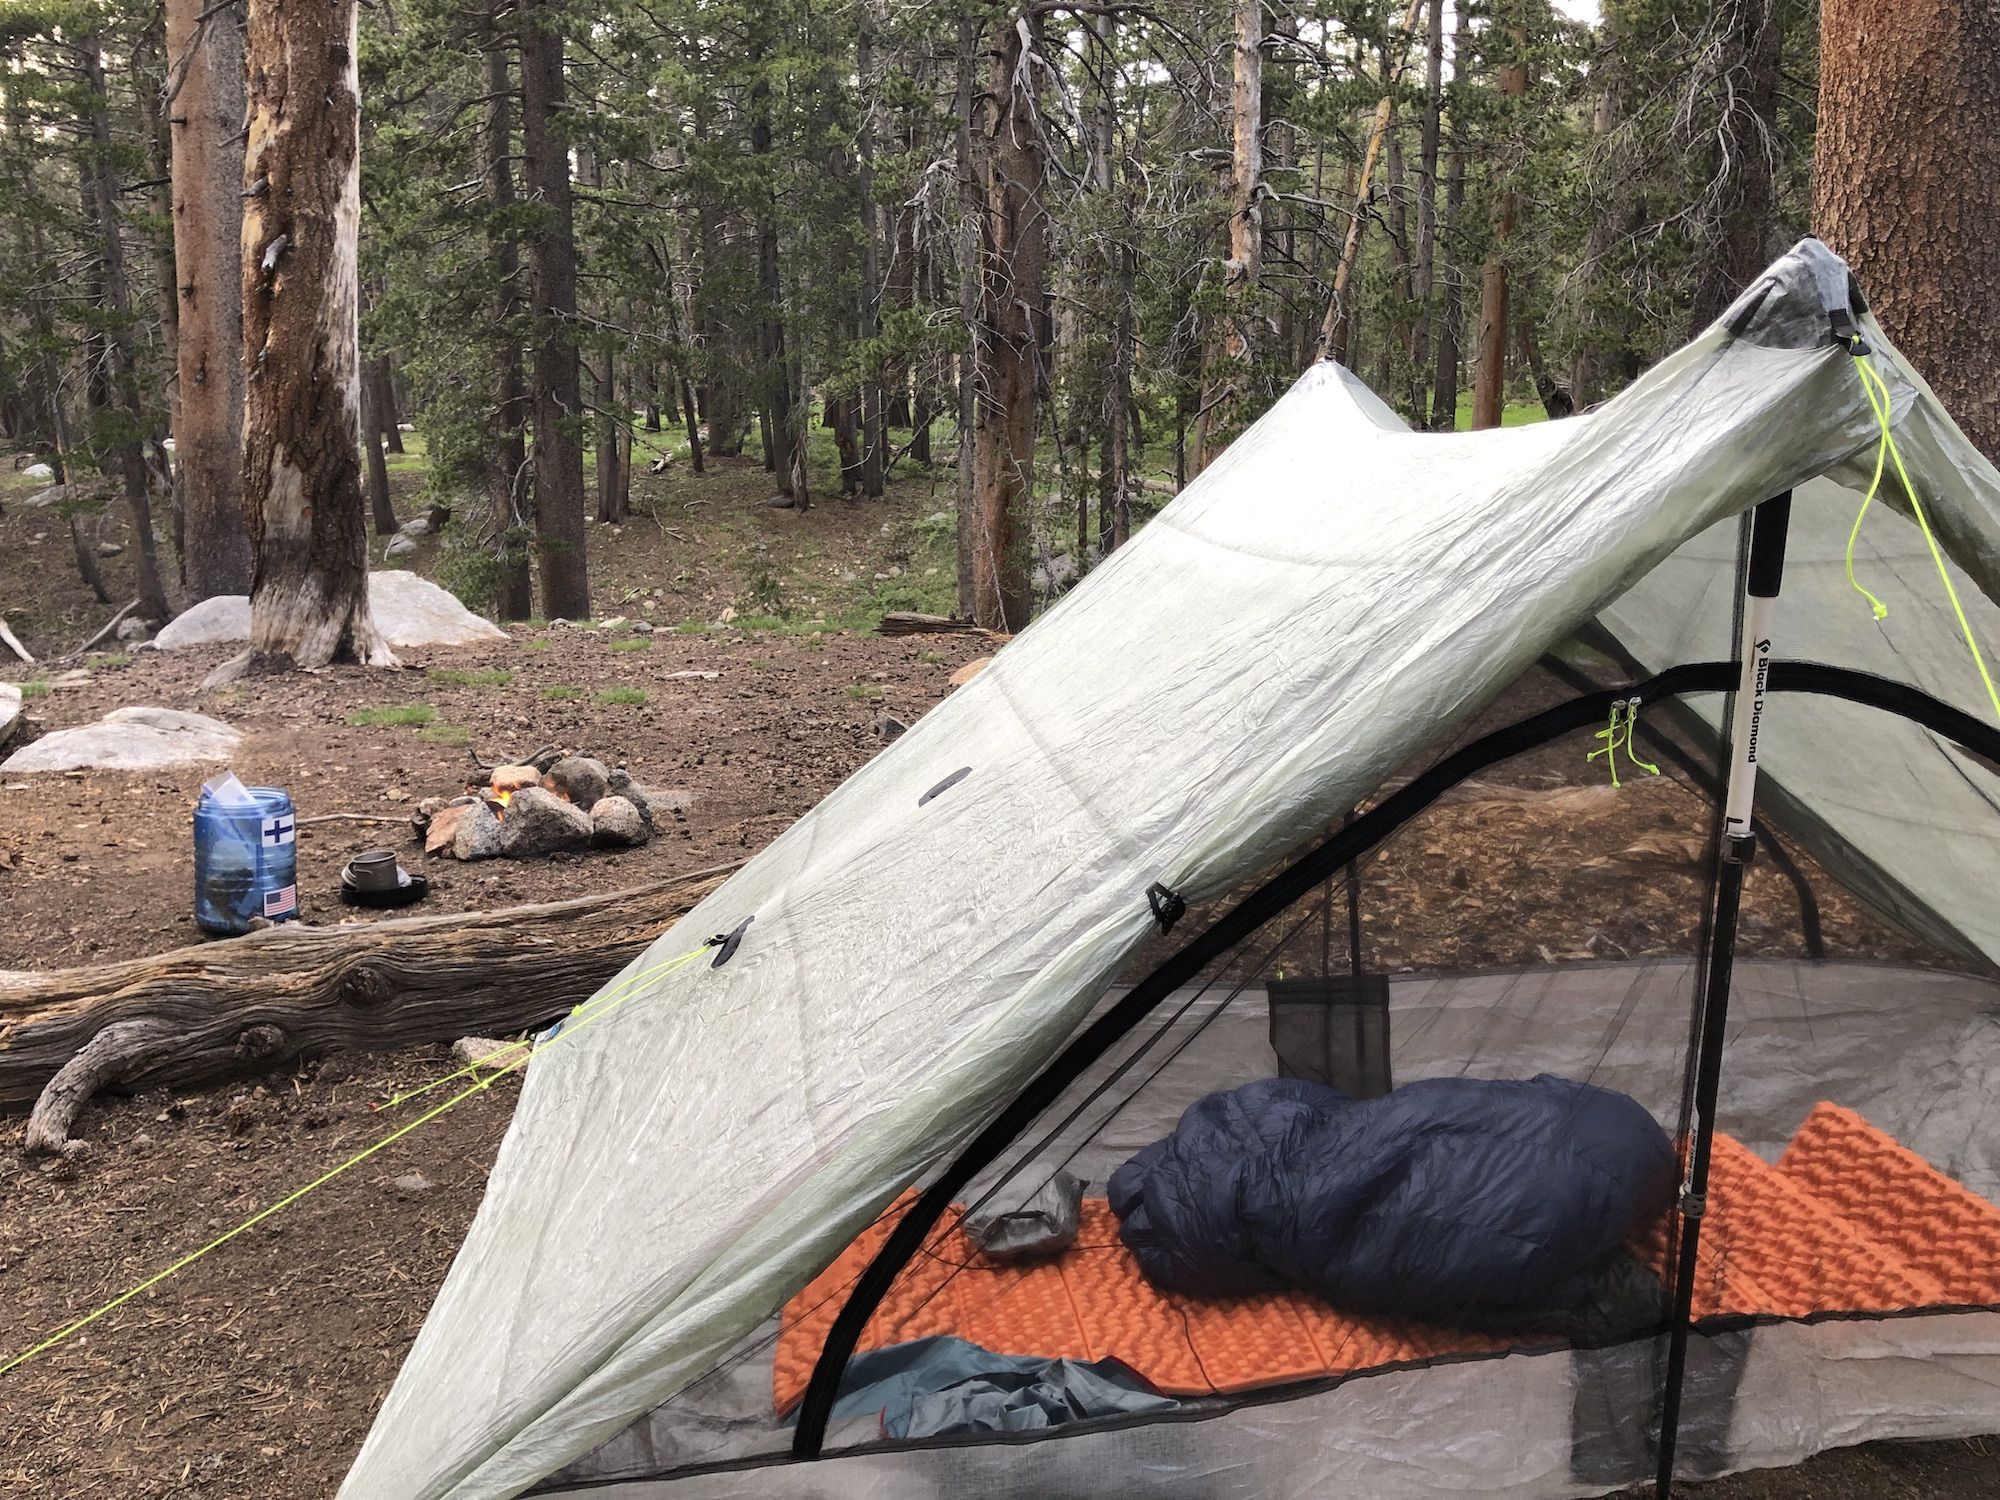 Ultralight tent set up in a forest along the JMT